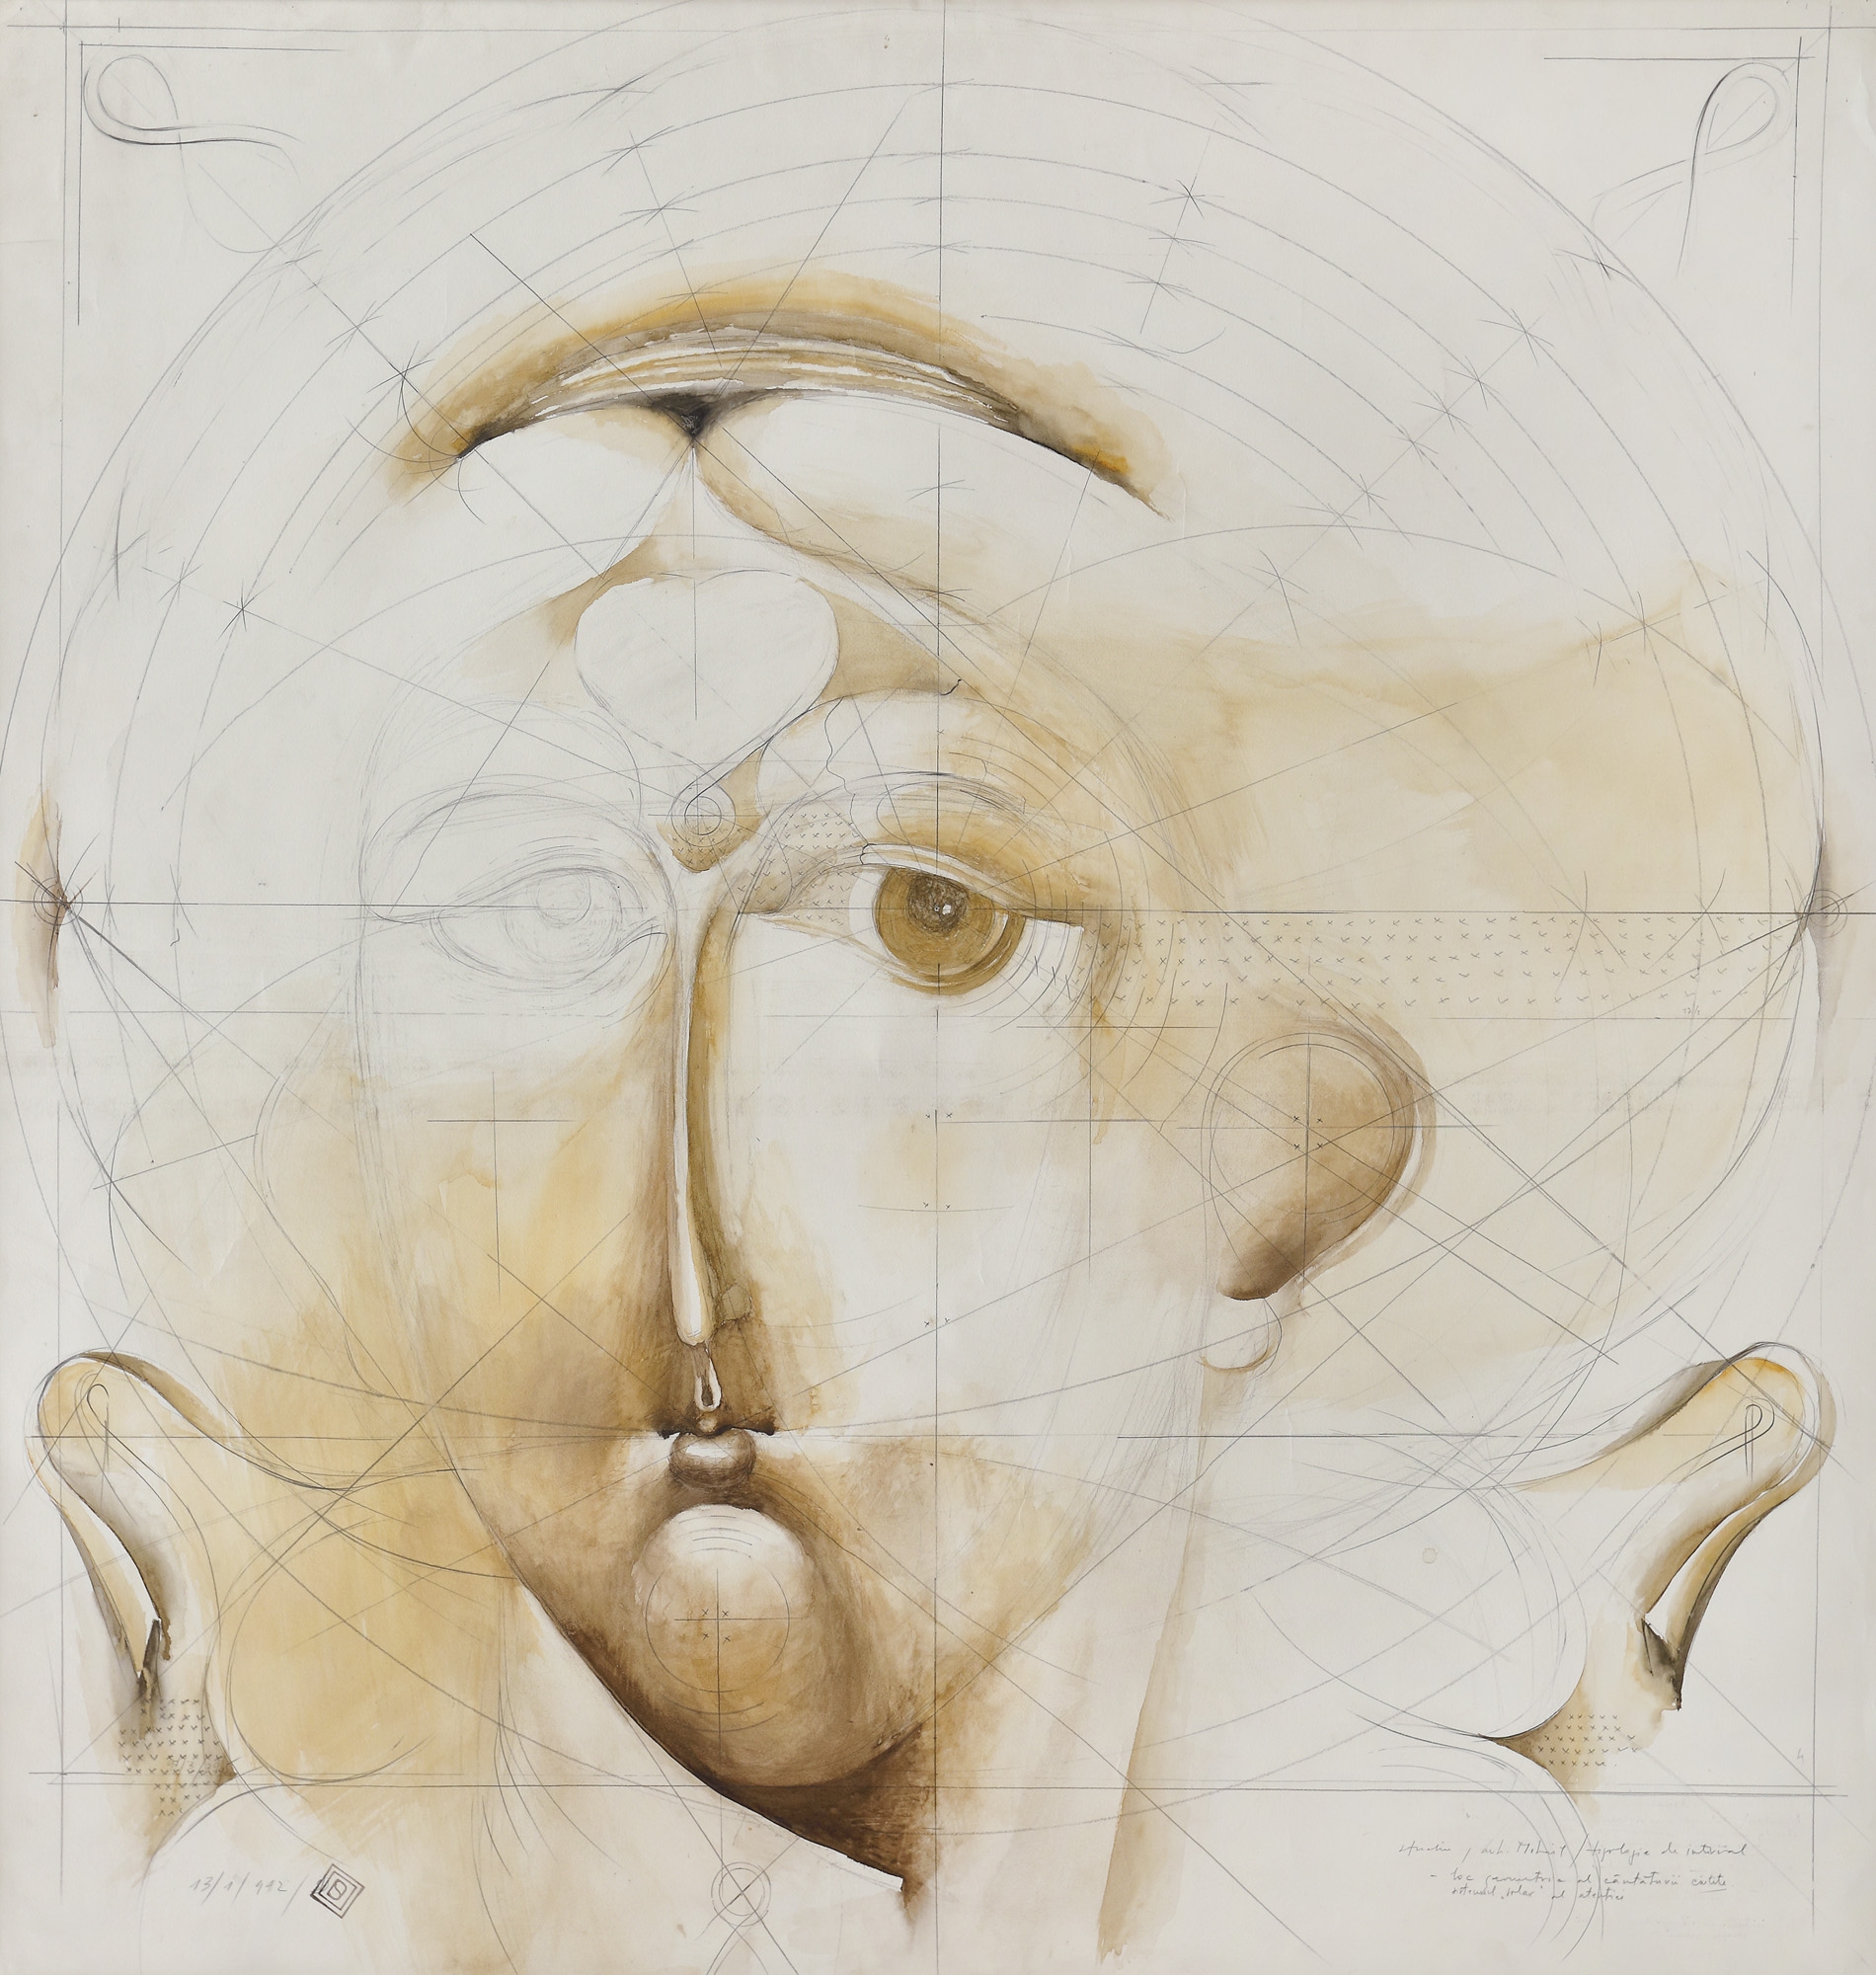 Artwork by Sorin Dumitrescu, Study for Archangel Michael, Made of watercolour and pencil on paper